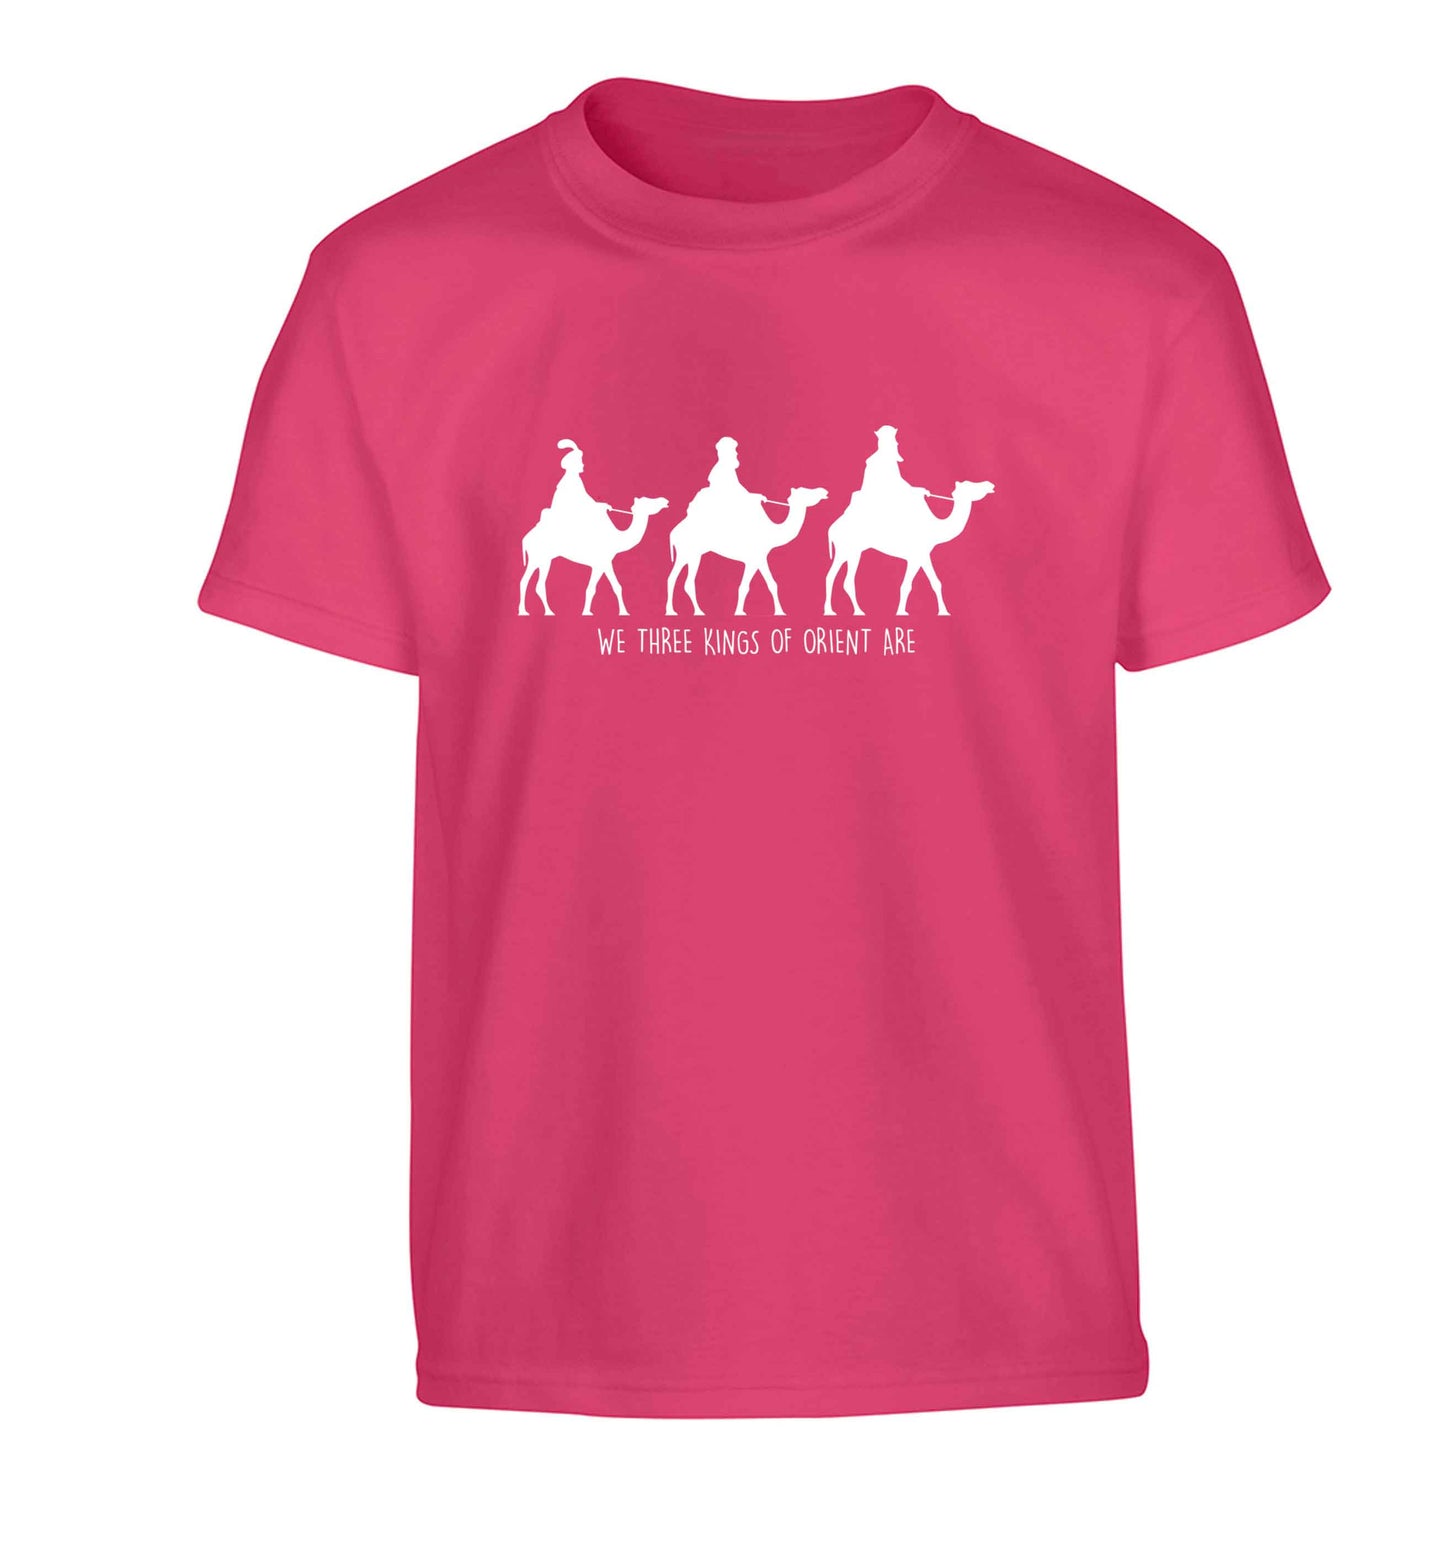 We three kings of orient are Children's pink Tshirt 12-13 Years